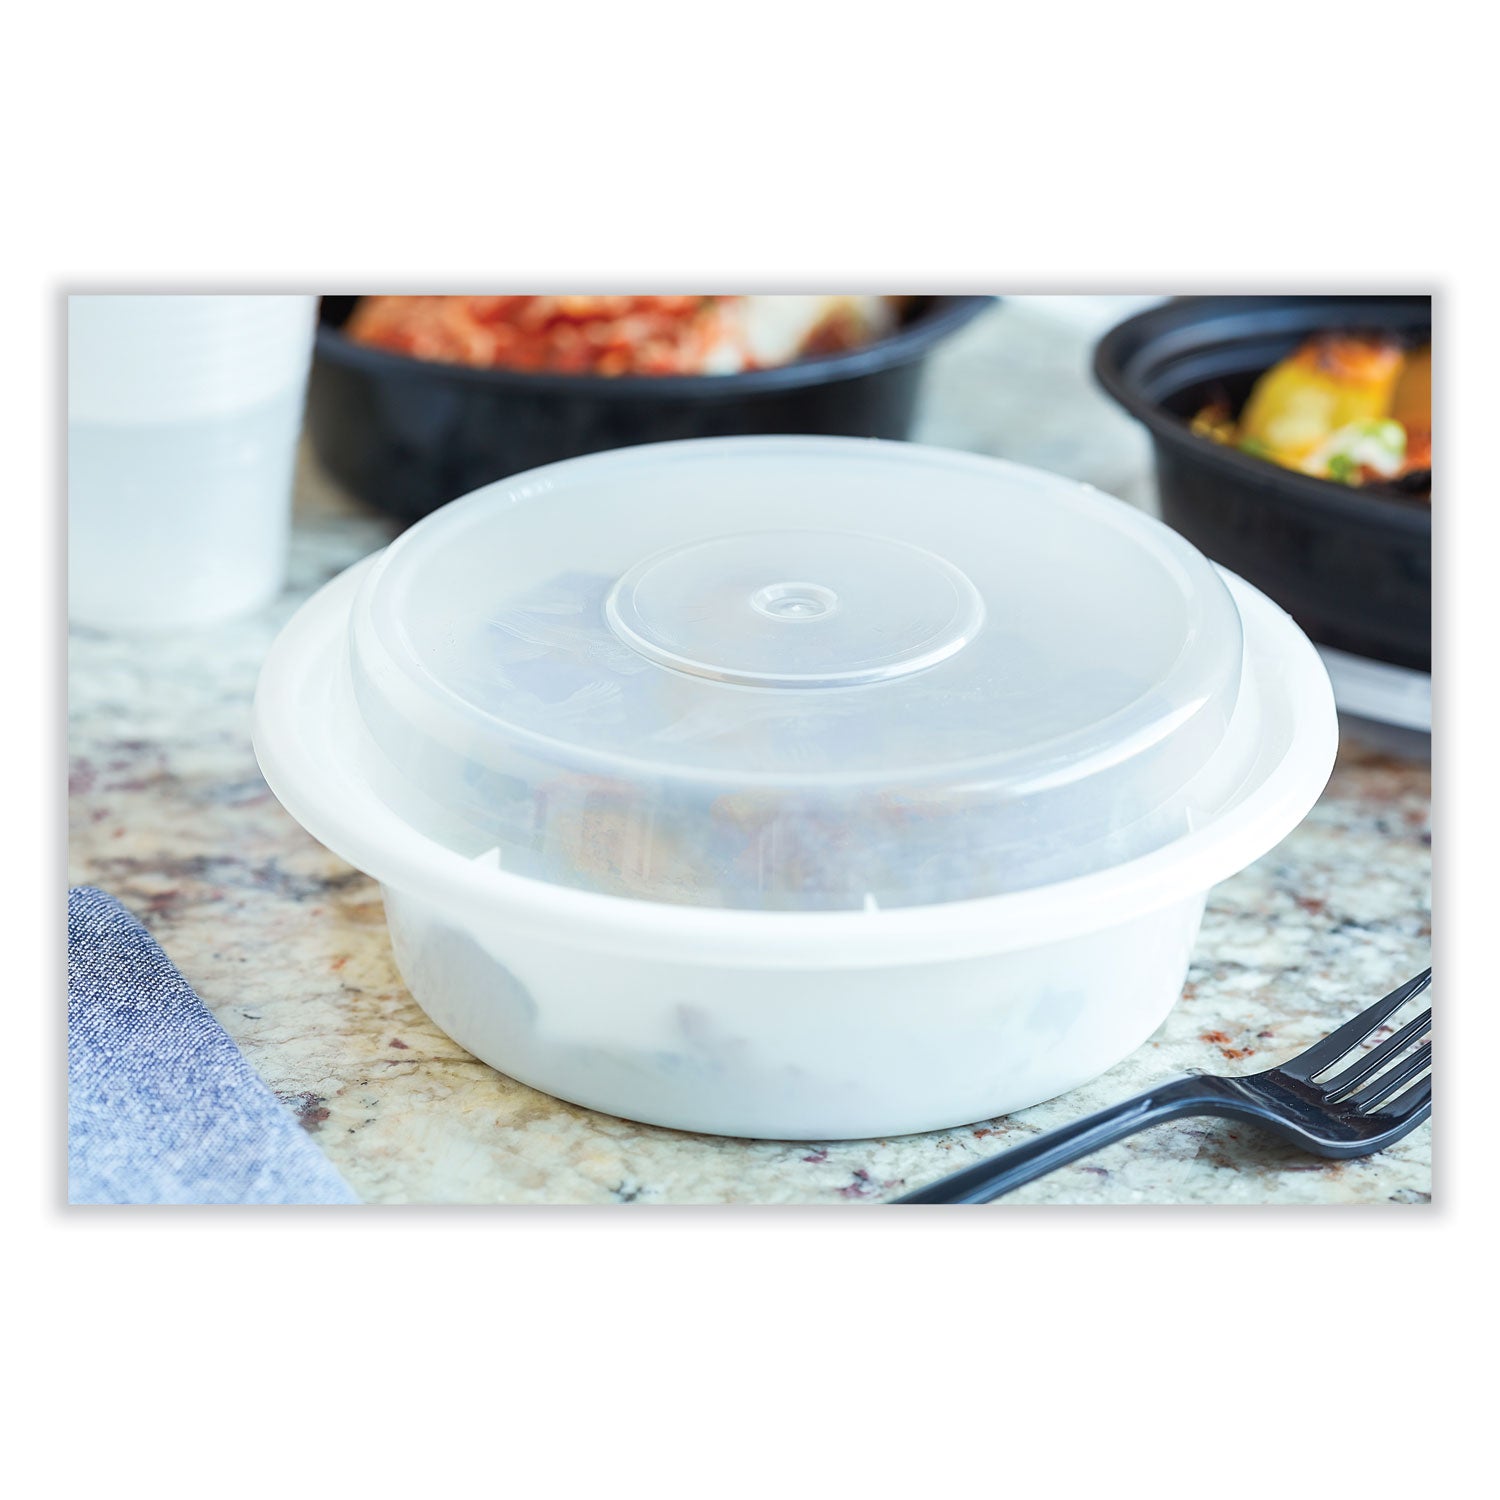 newspring-versatainer-microwavable-containers-round-32-oz-7-x-7-x-275-white-clear-plastic-150-carton_pctnc729 - 4